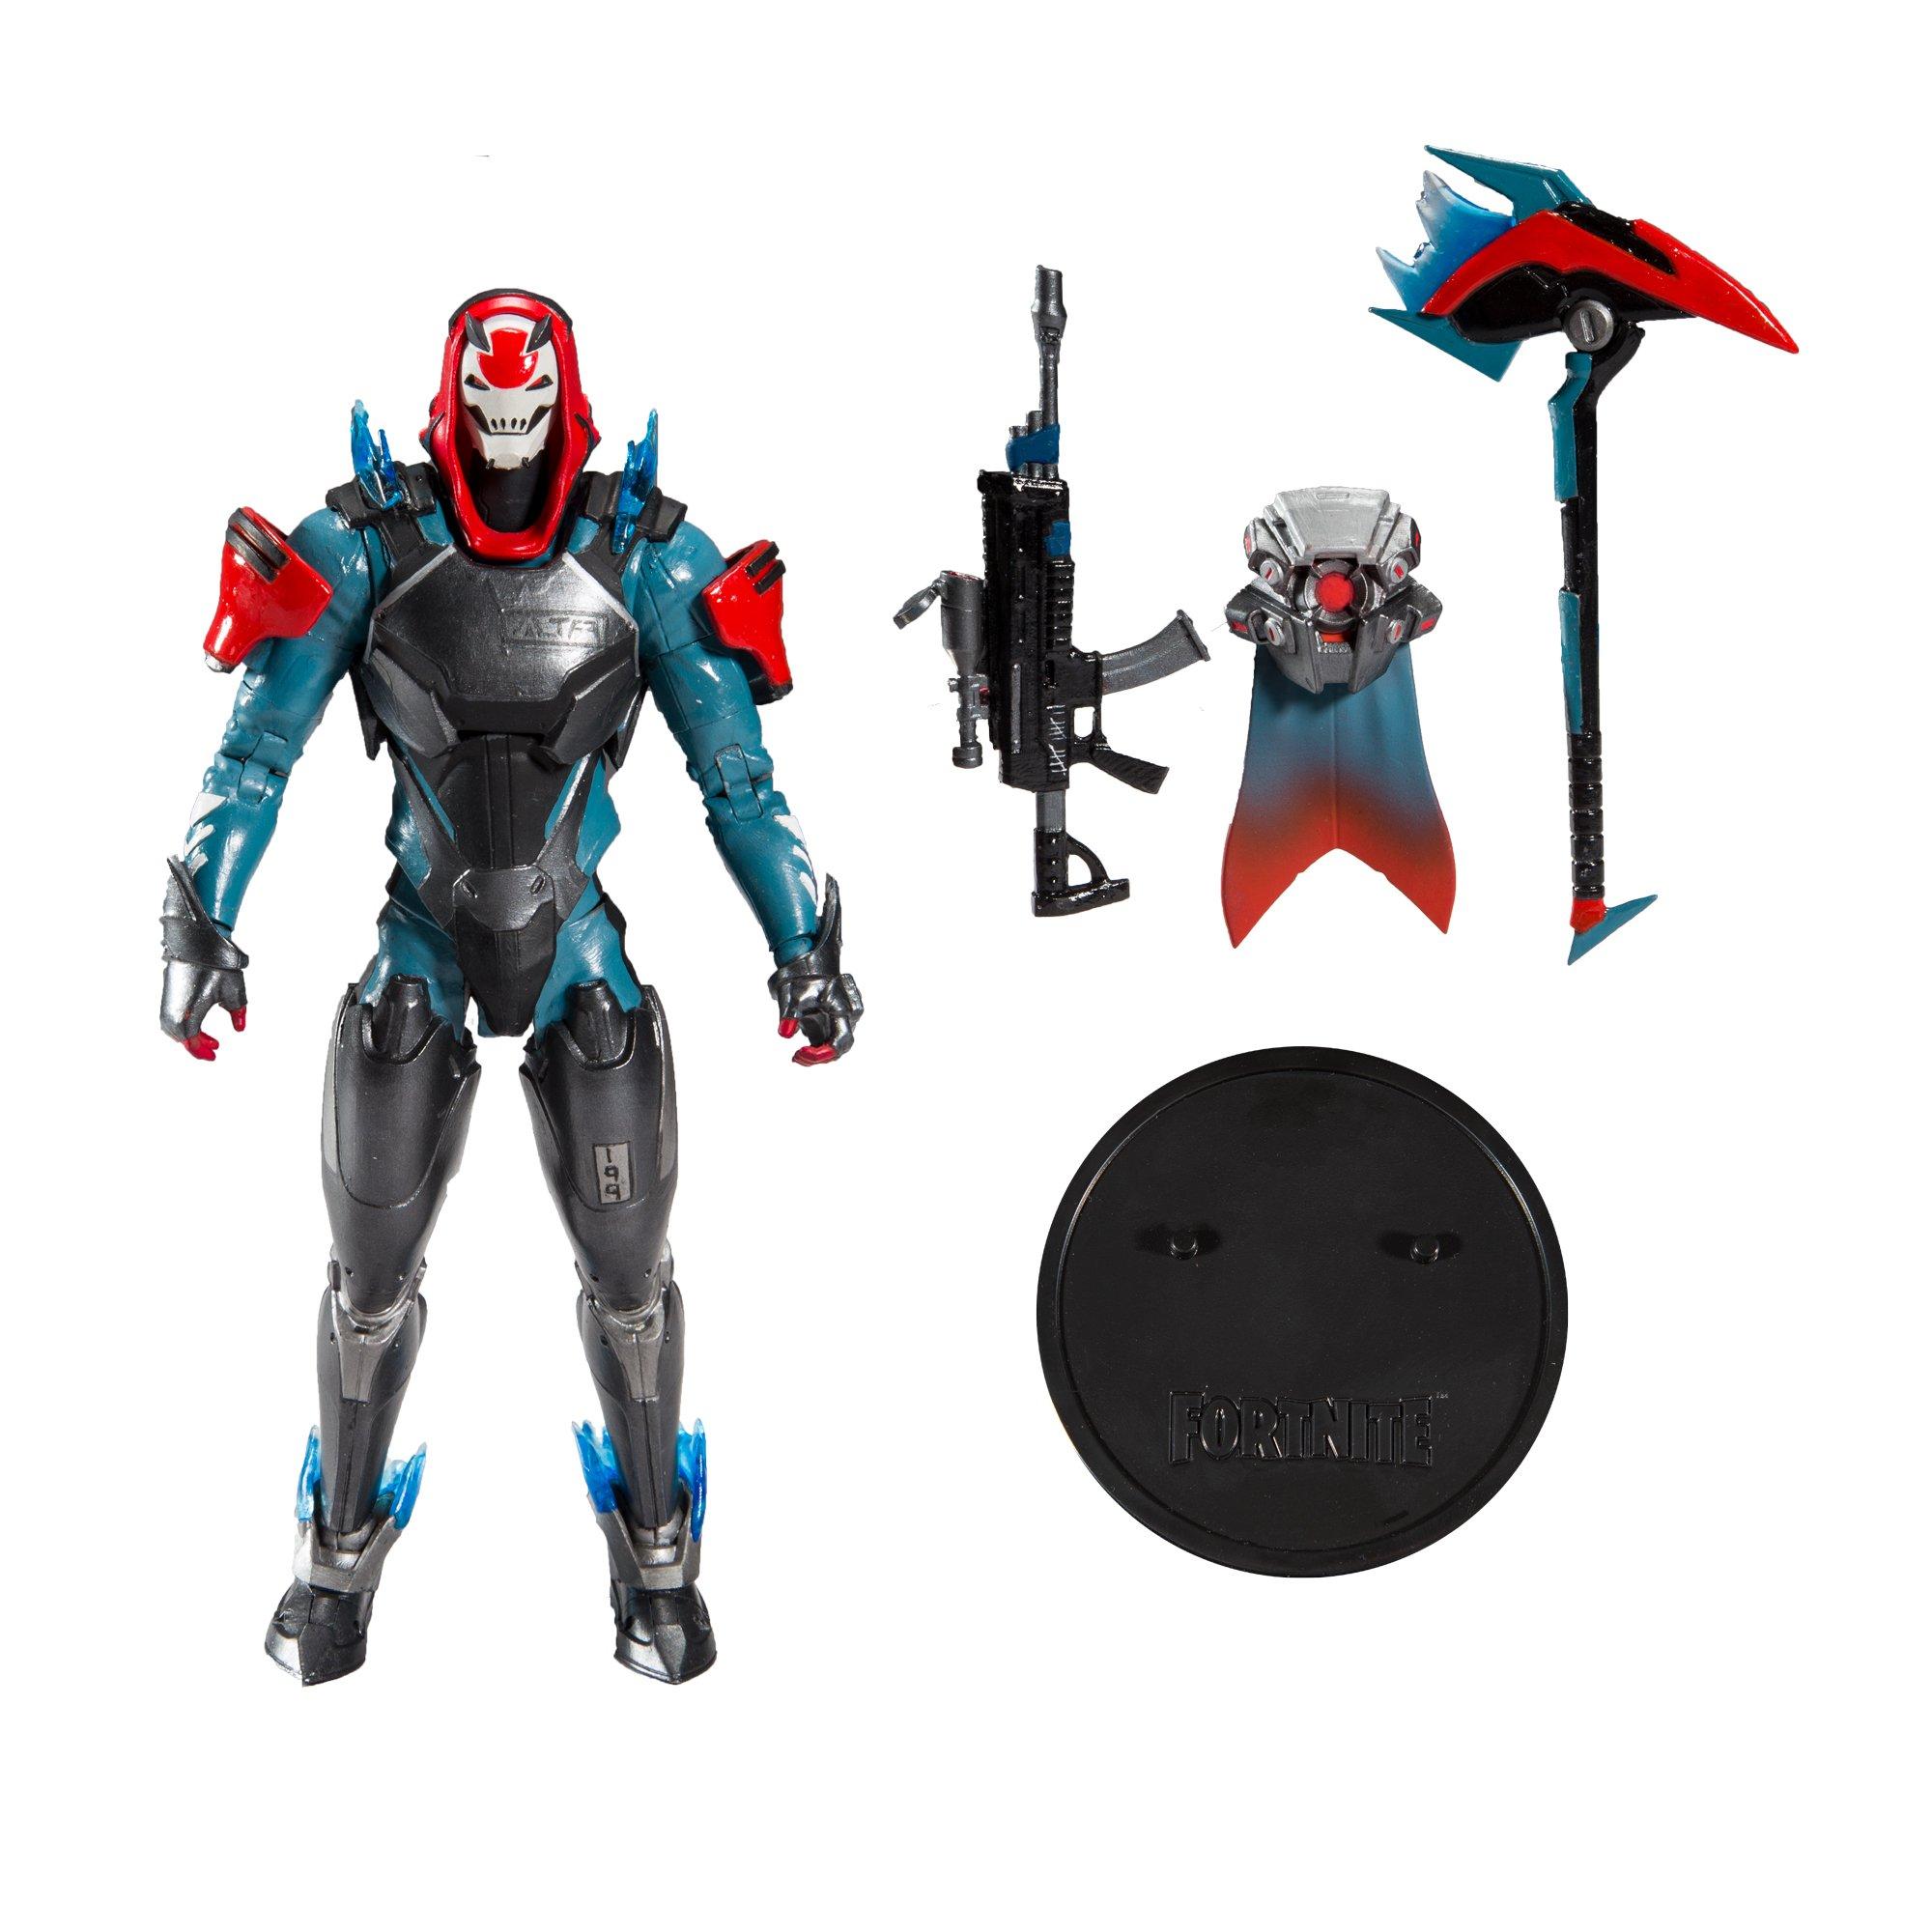 fortnite action figures toys